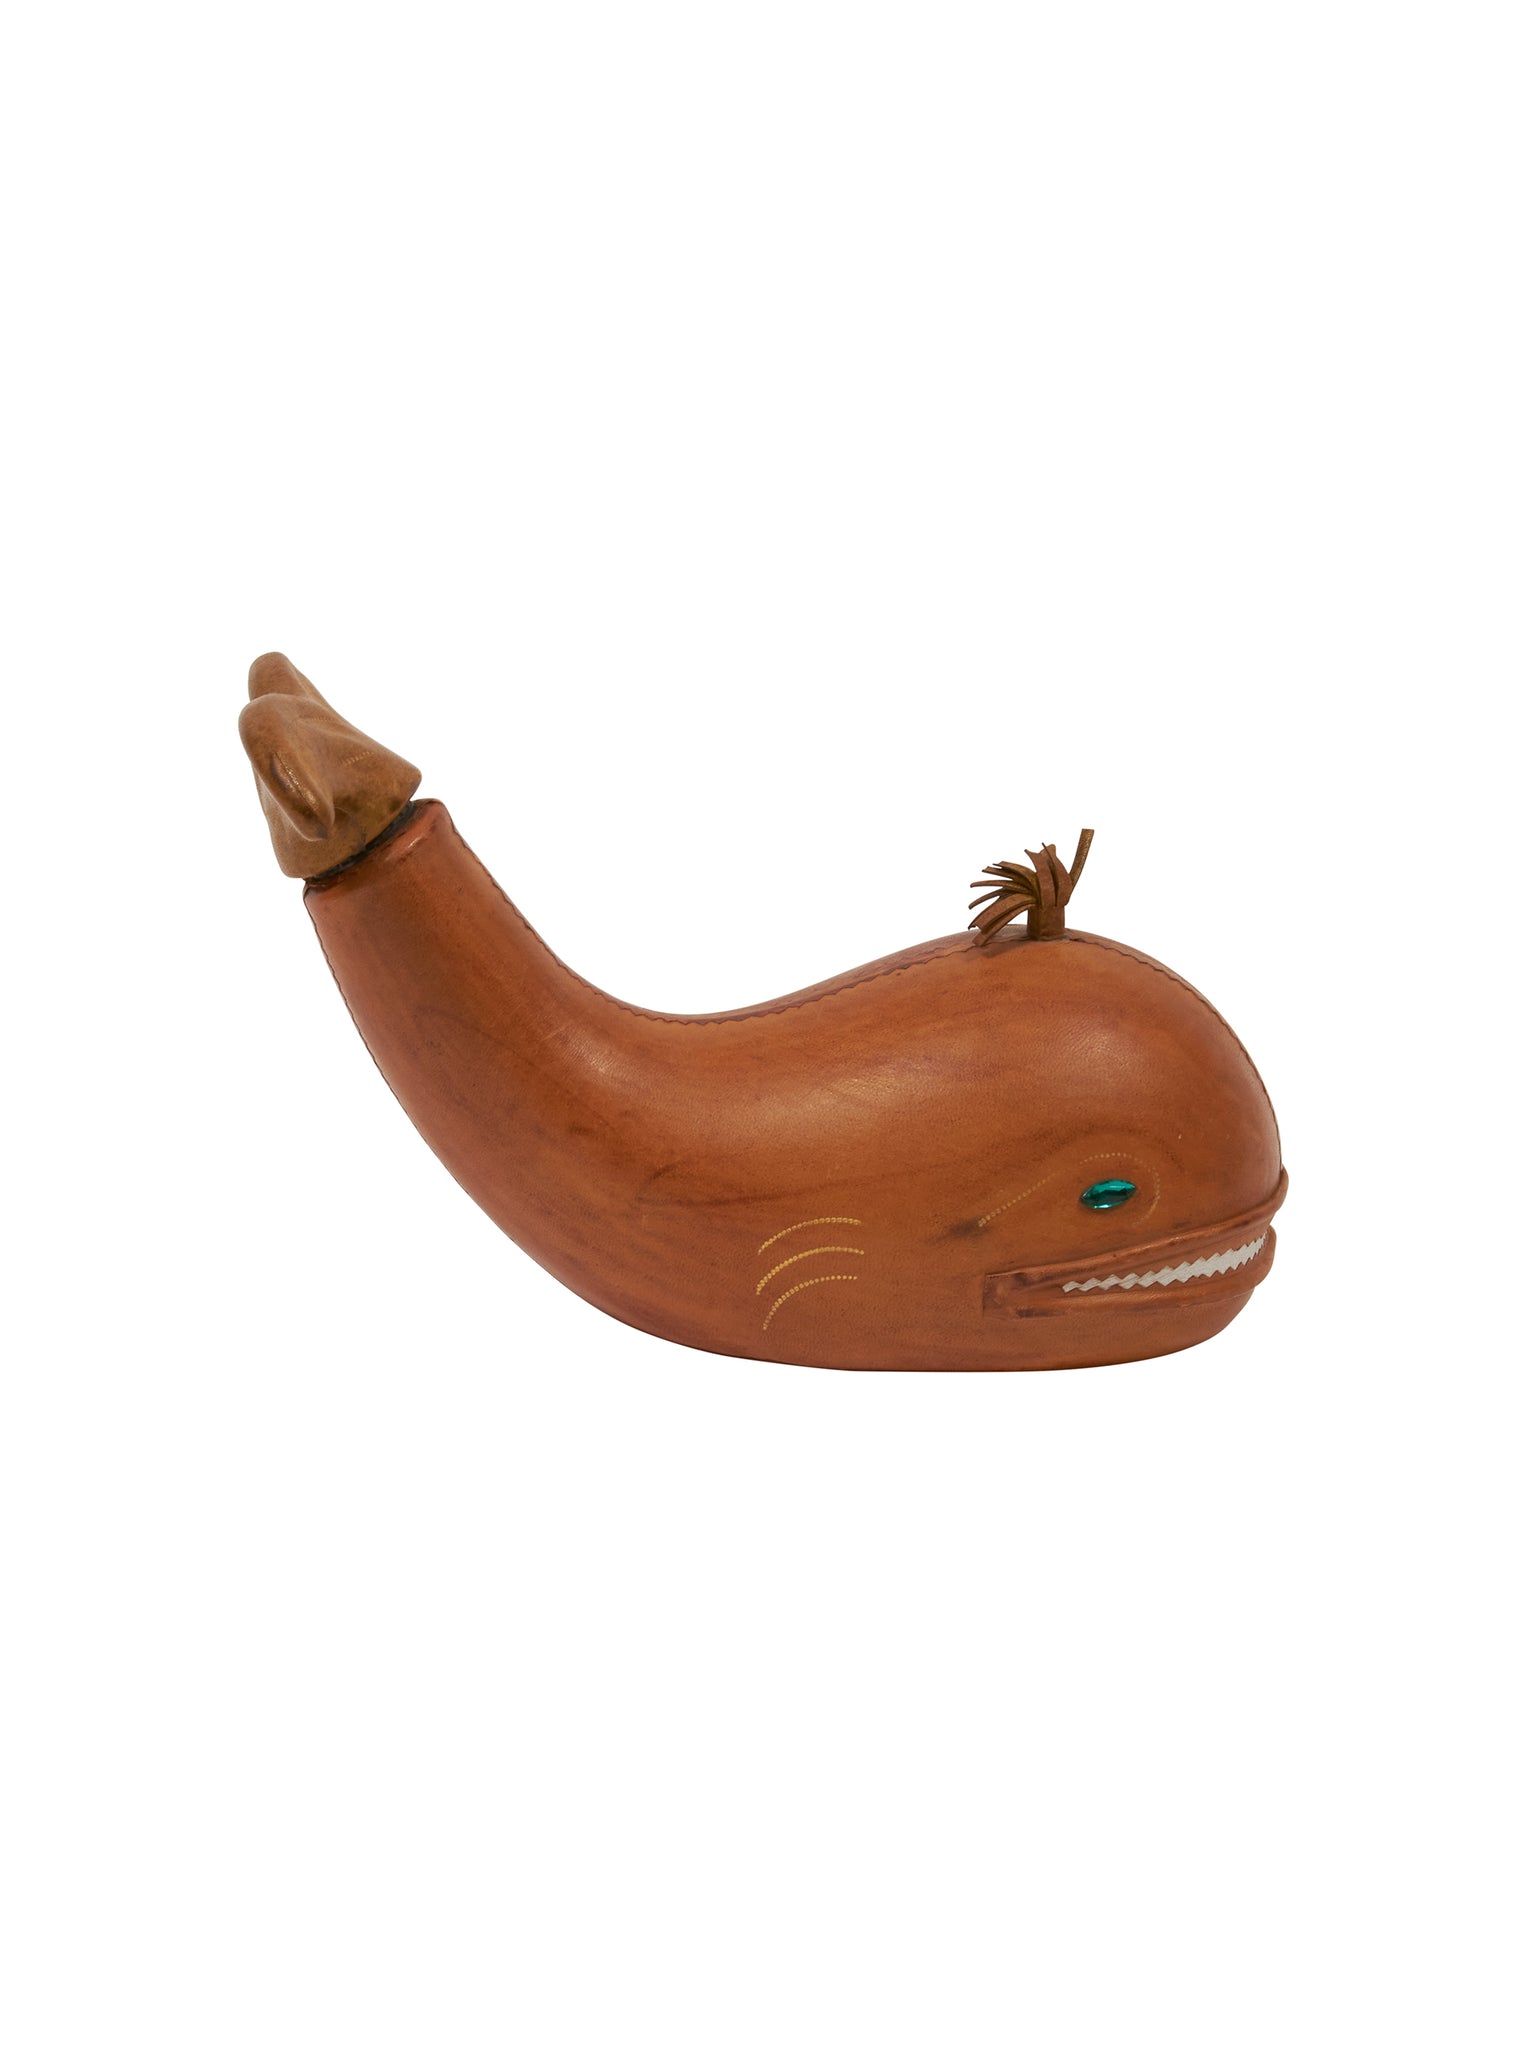 Vintage 1960s Italian Leather Whale Decanter Weston Table